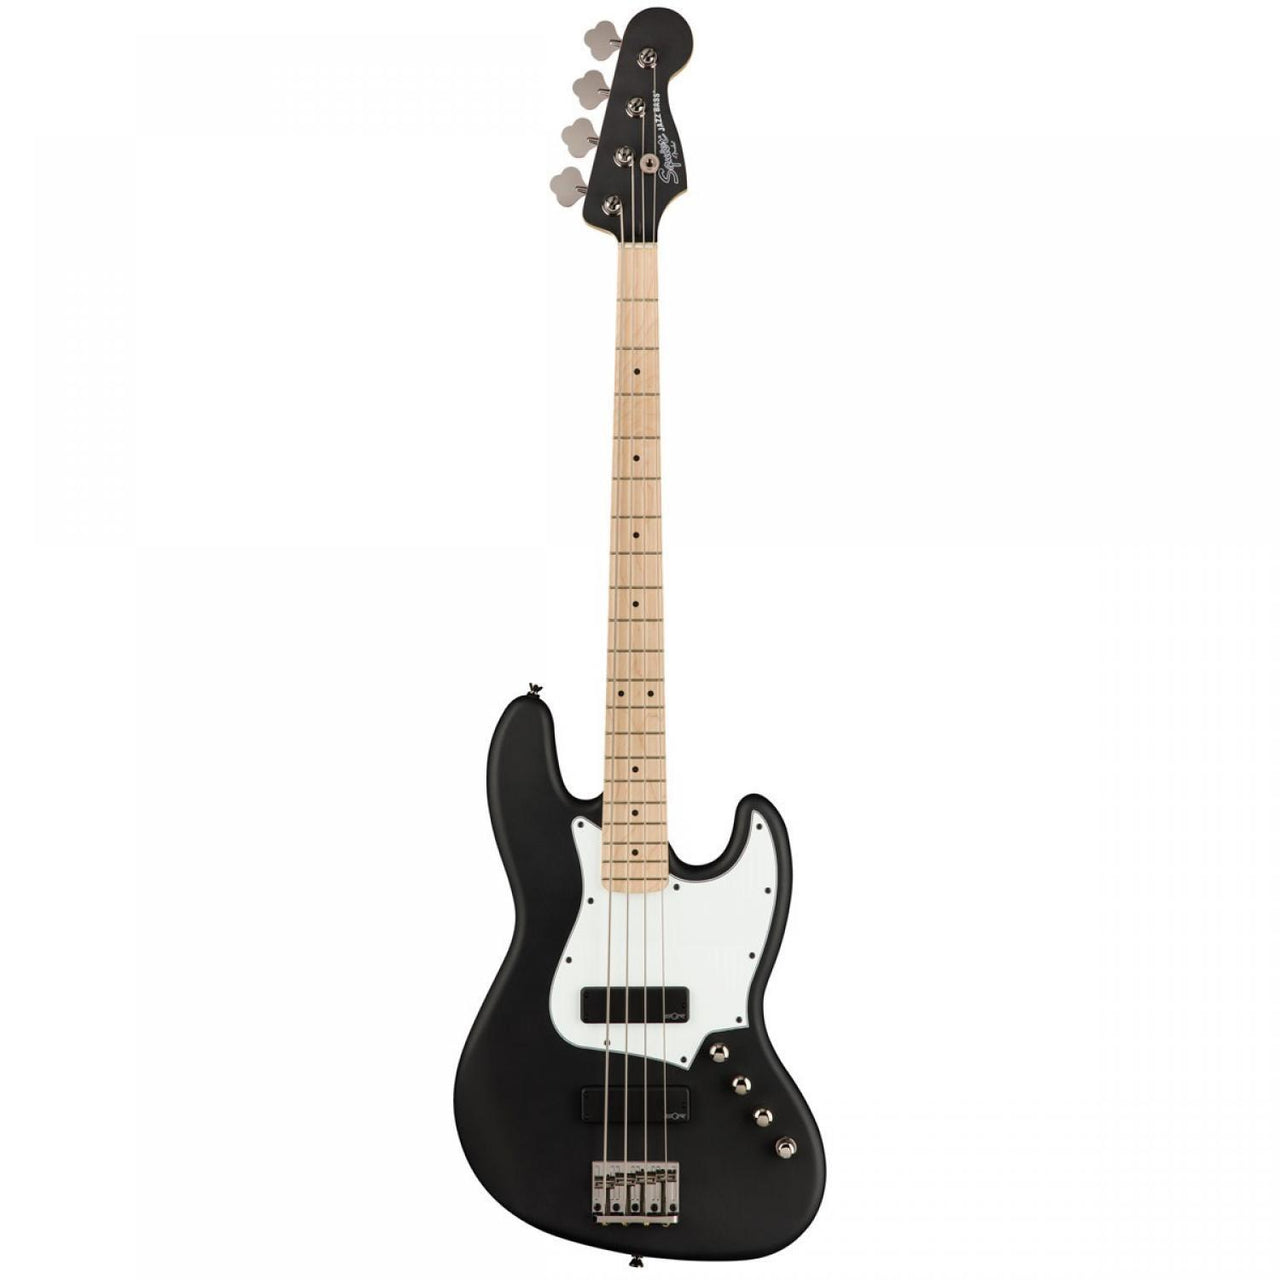 Bajo Electrico Fender Cont Act J Bass Hh Mn Flt Blk, 0370450510